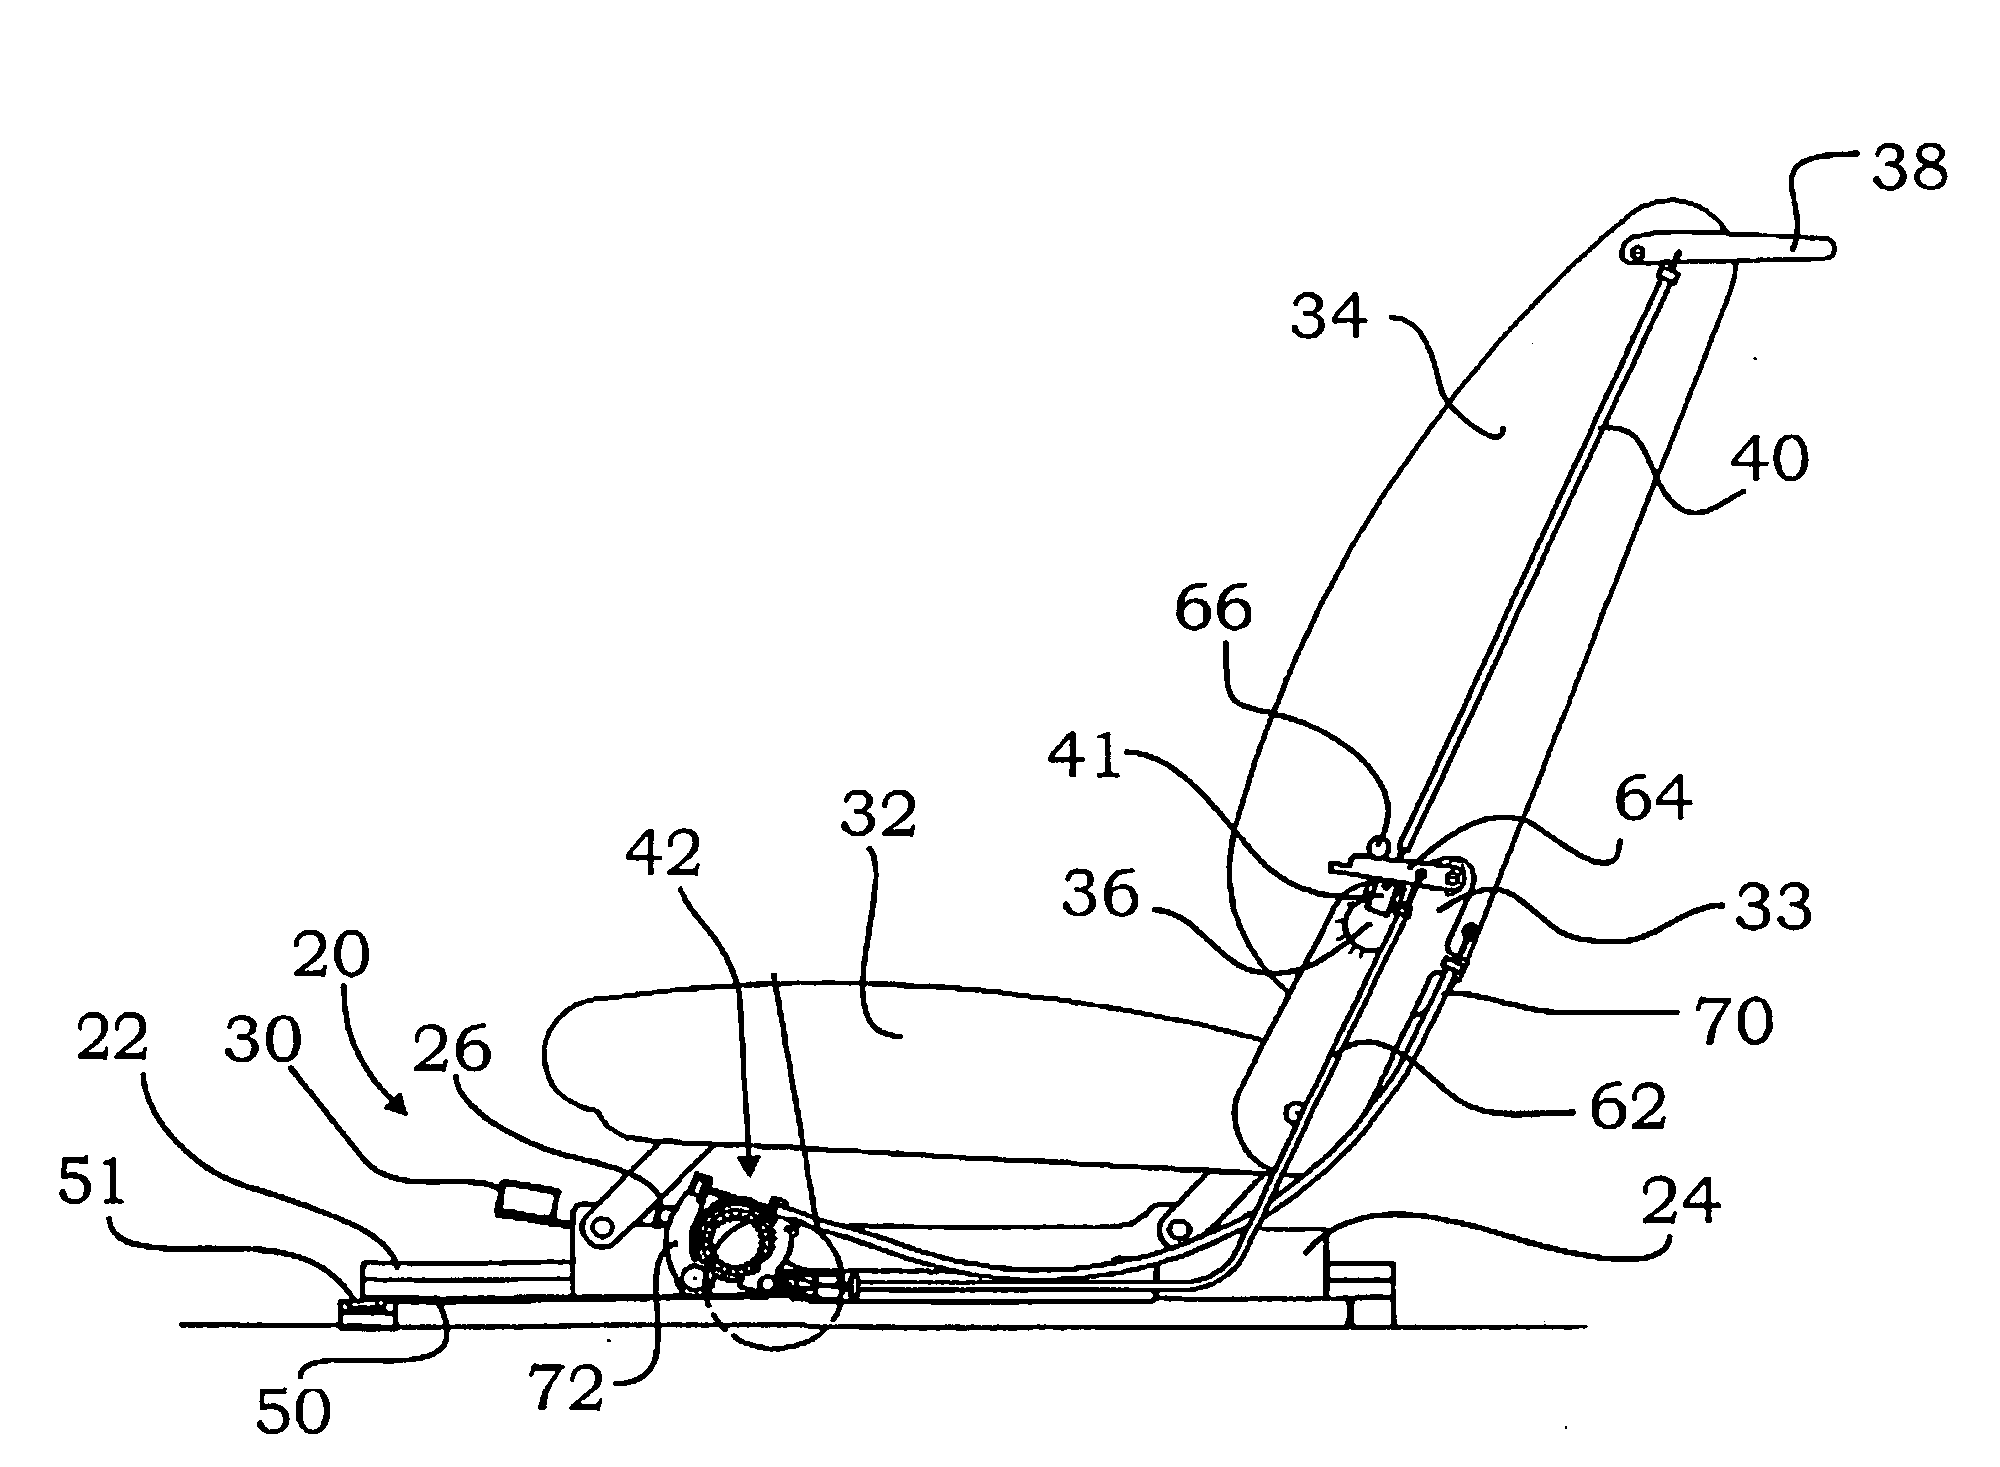 Forwardly movable vehicle seat with an underframe and two pairs of rails